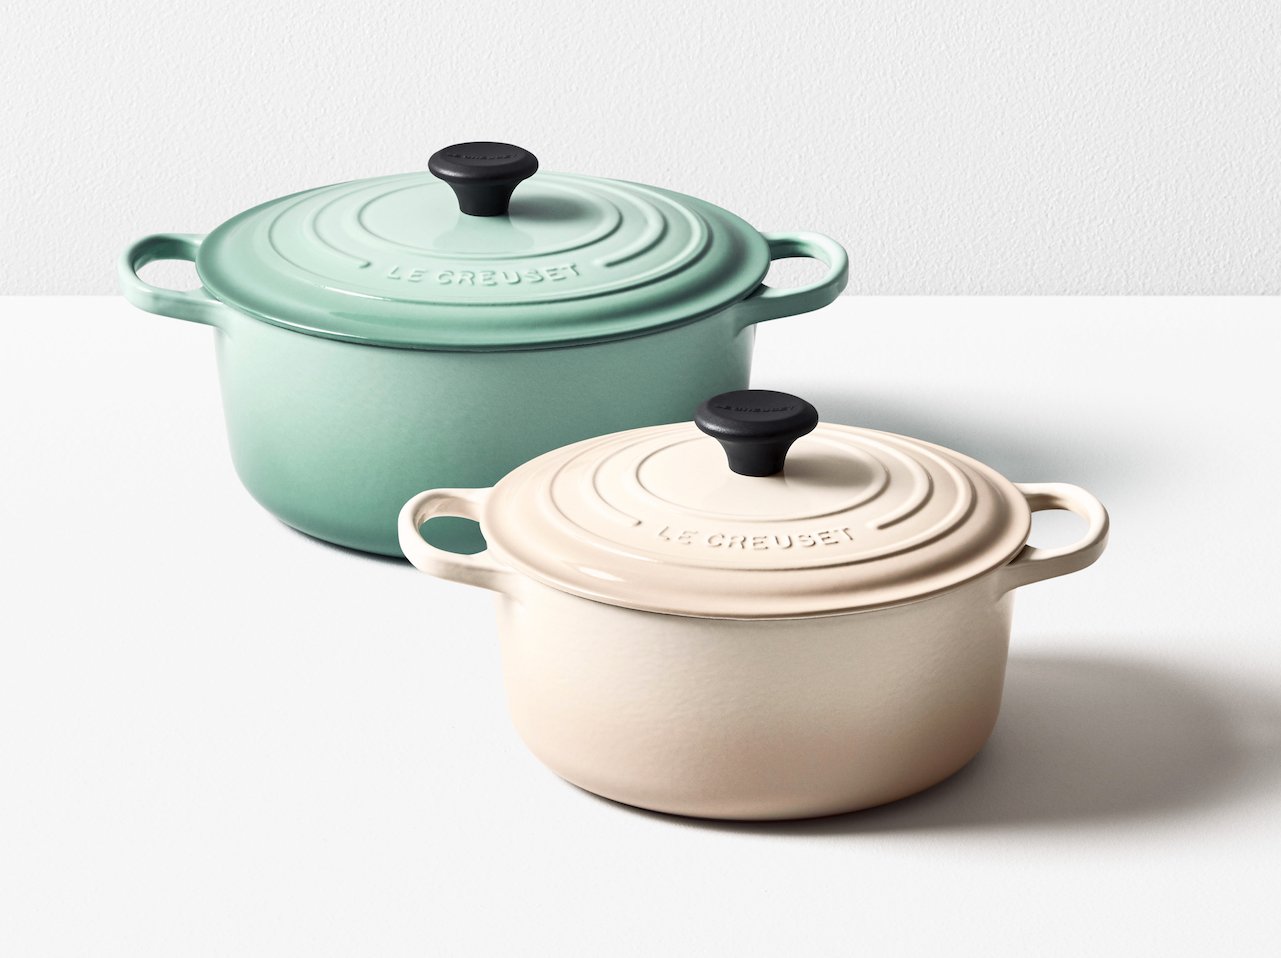 This Year's New Le Creuset Colours Are Sage And Meringue